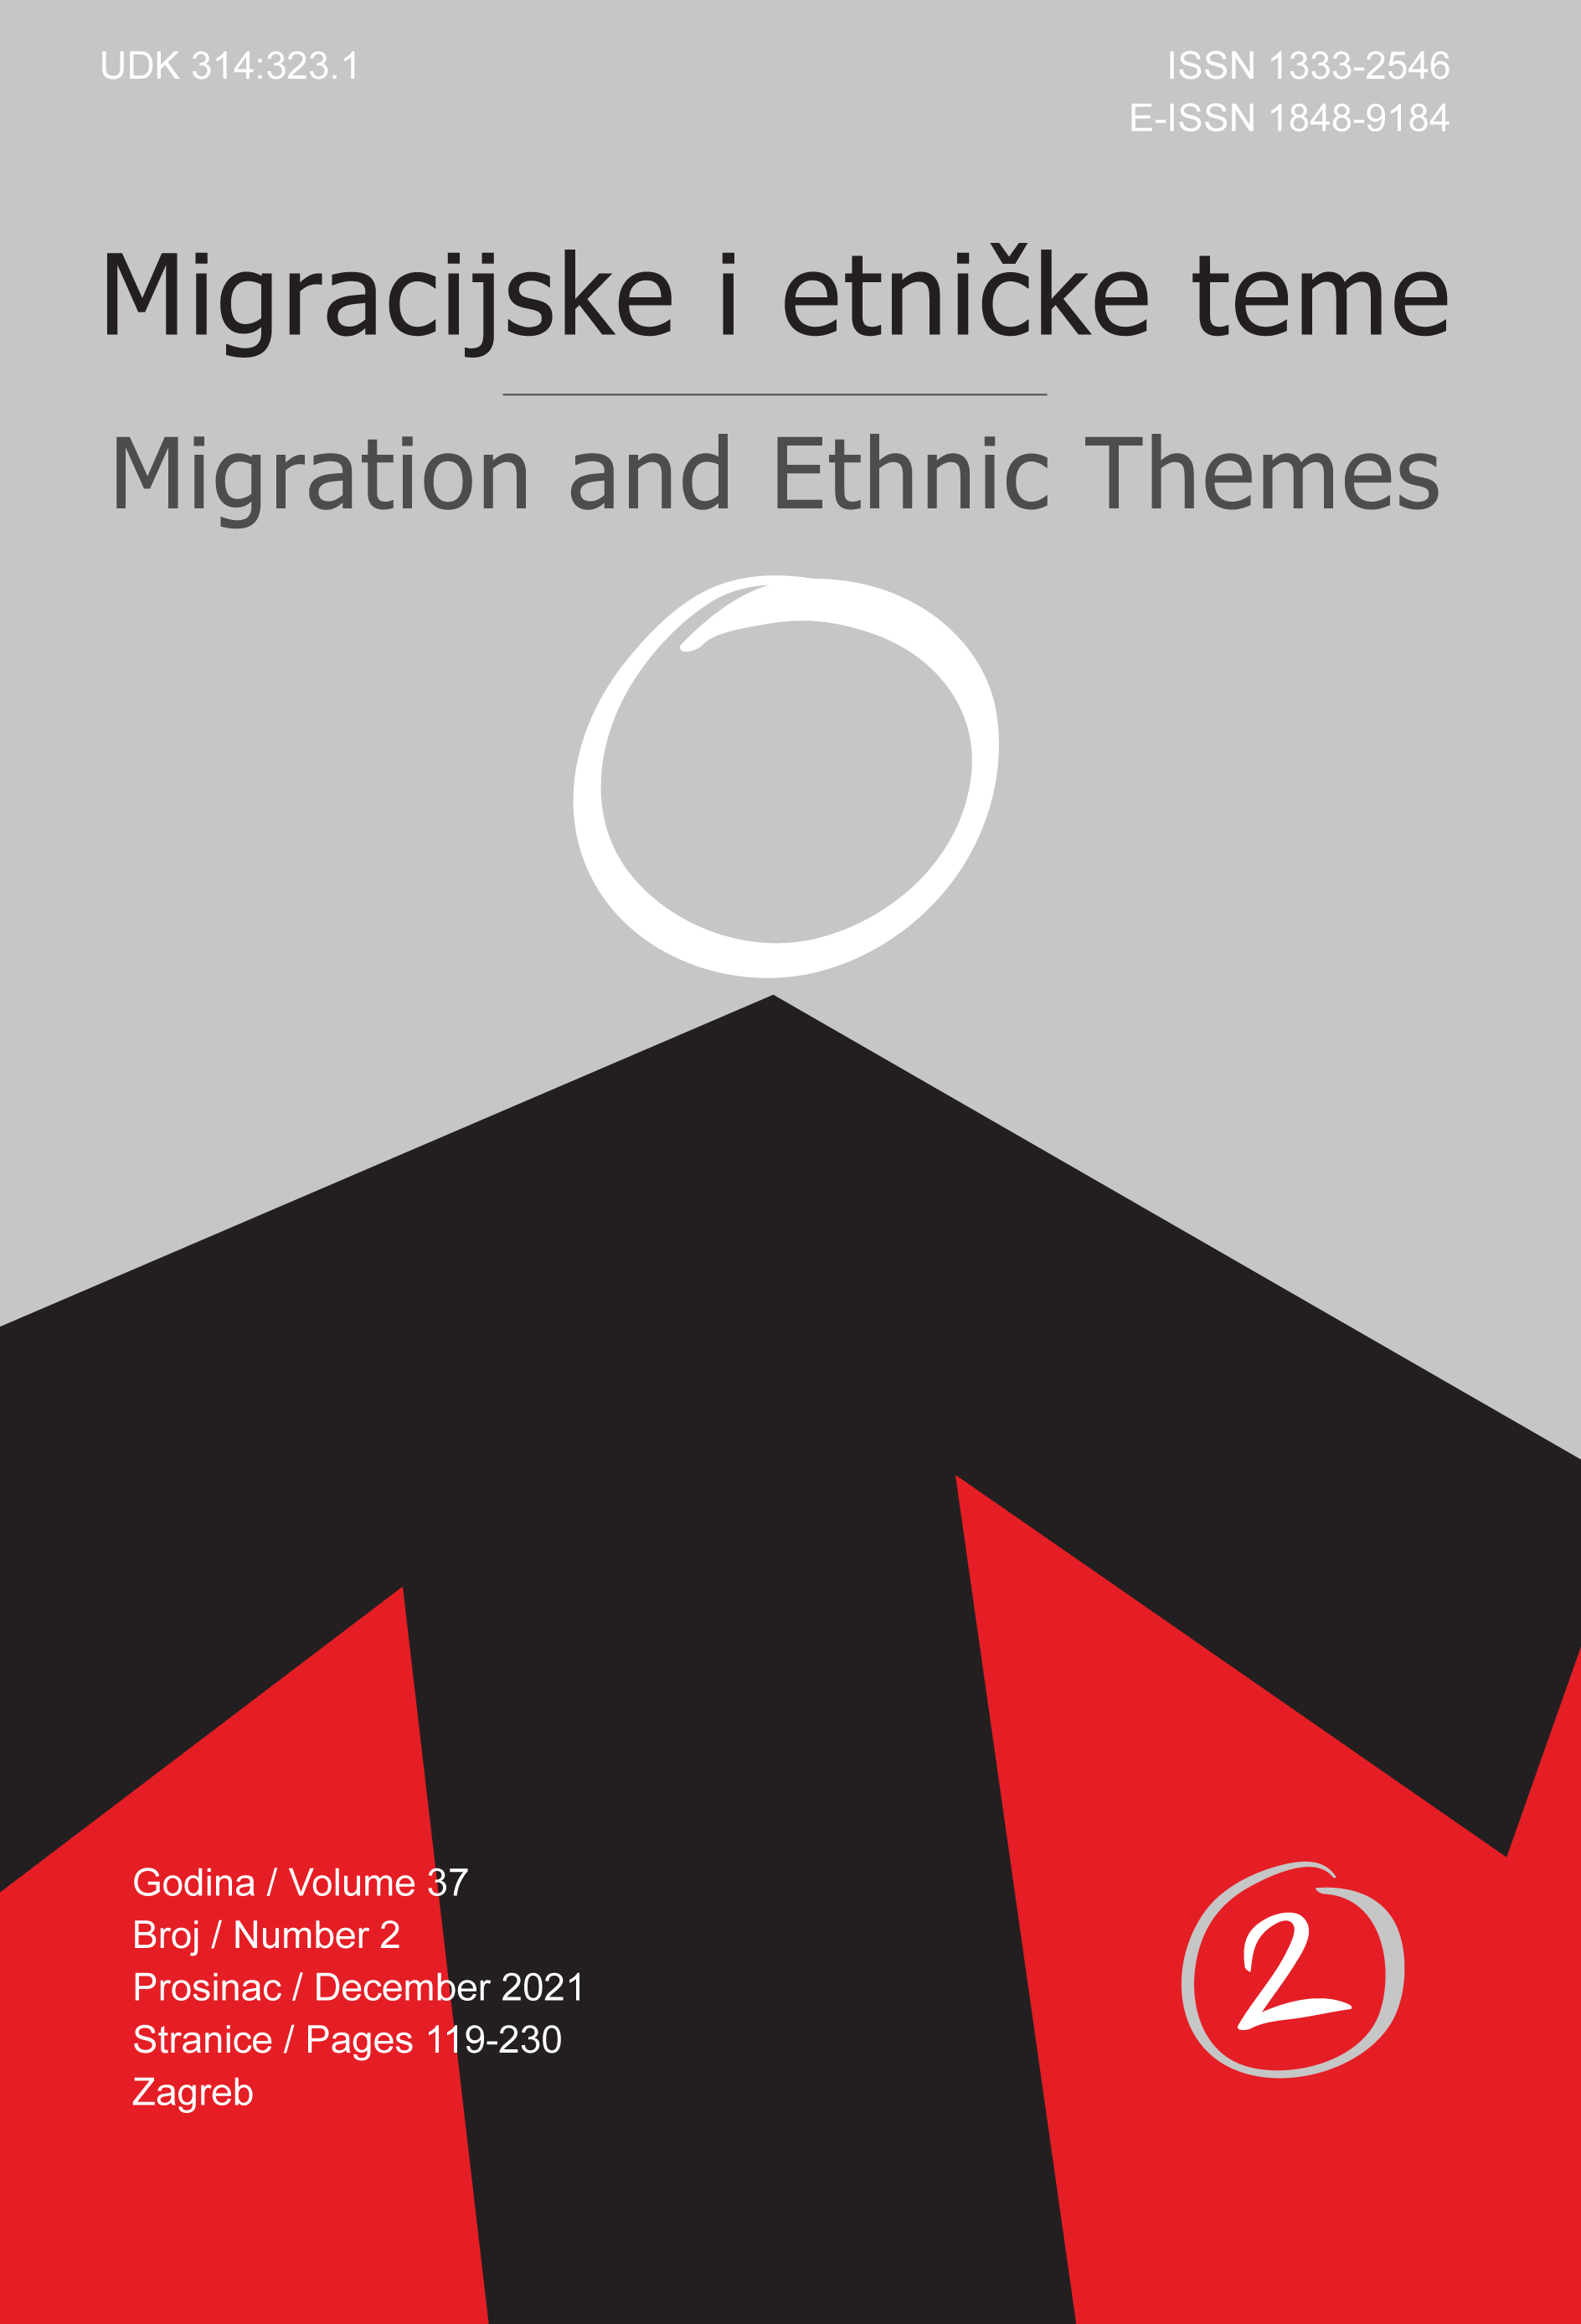 The Mythologisation of the Migrant Issue in the Federal Republic of Germany as a Result of the 2015 European Migrant Crisis and Its Effect on Changes in German Migration Policy